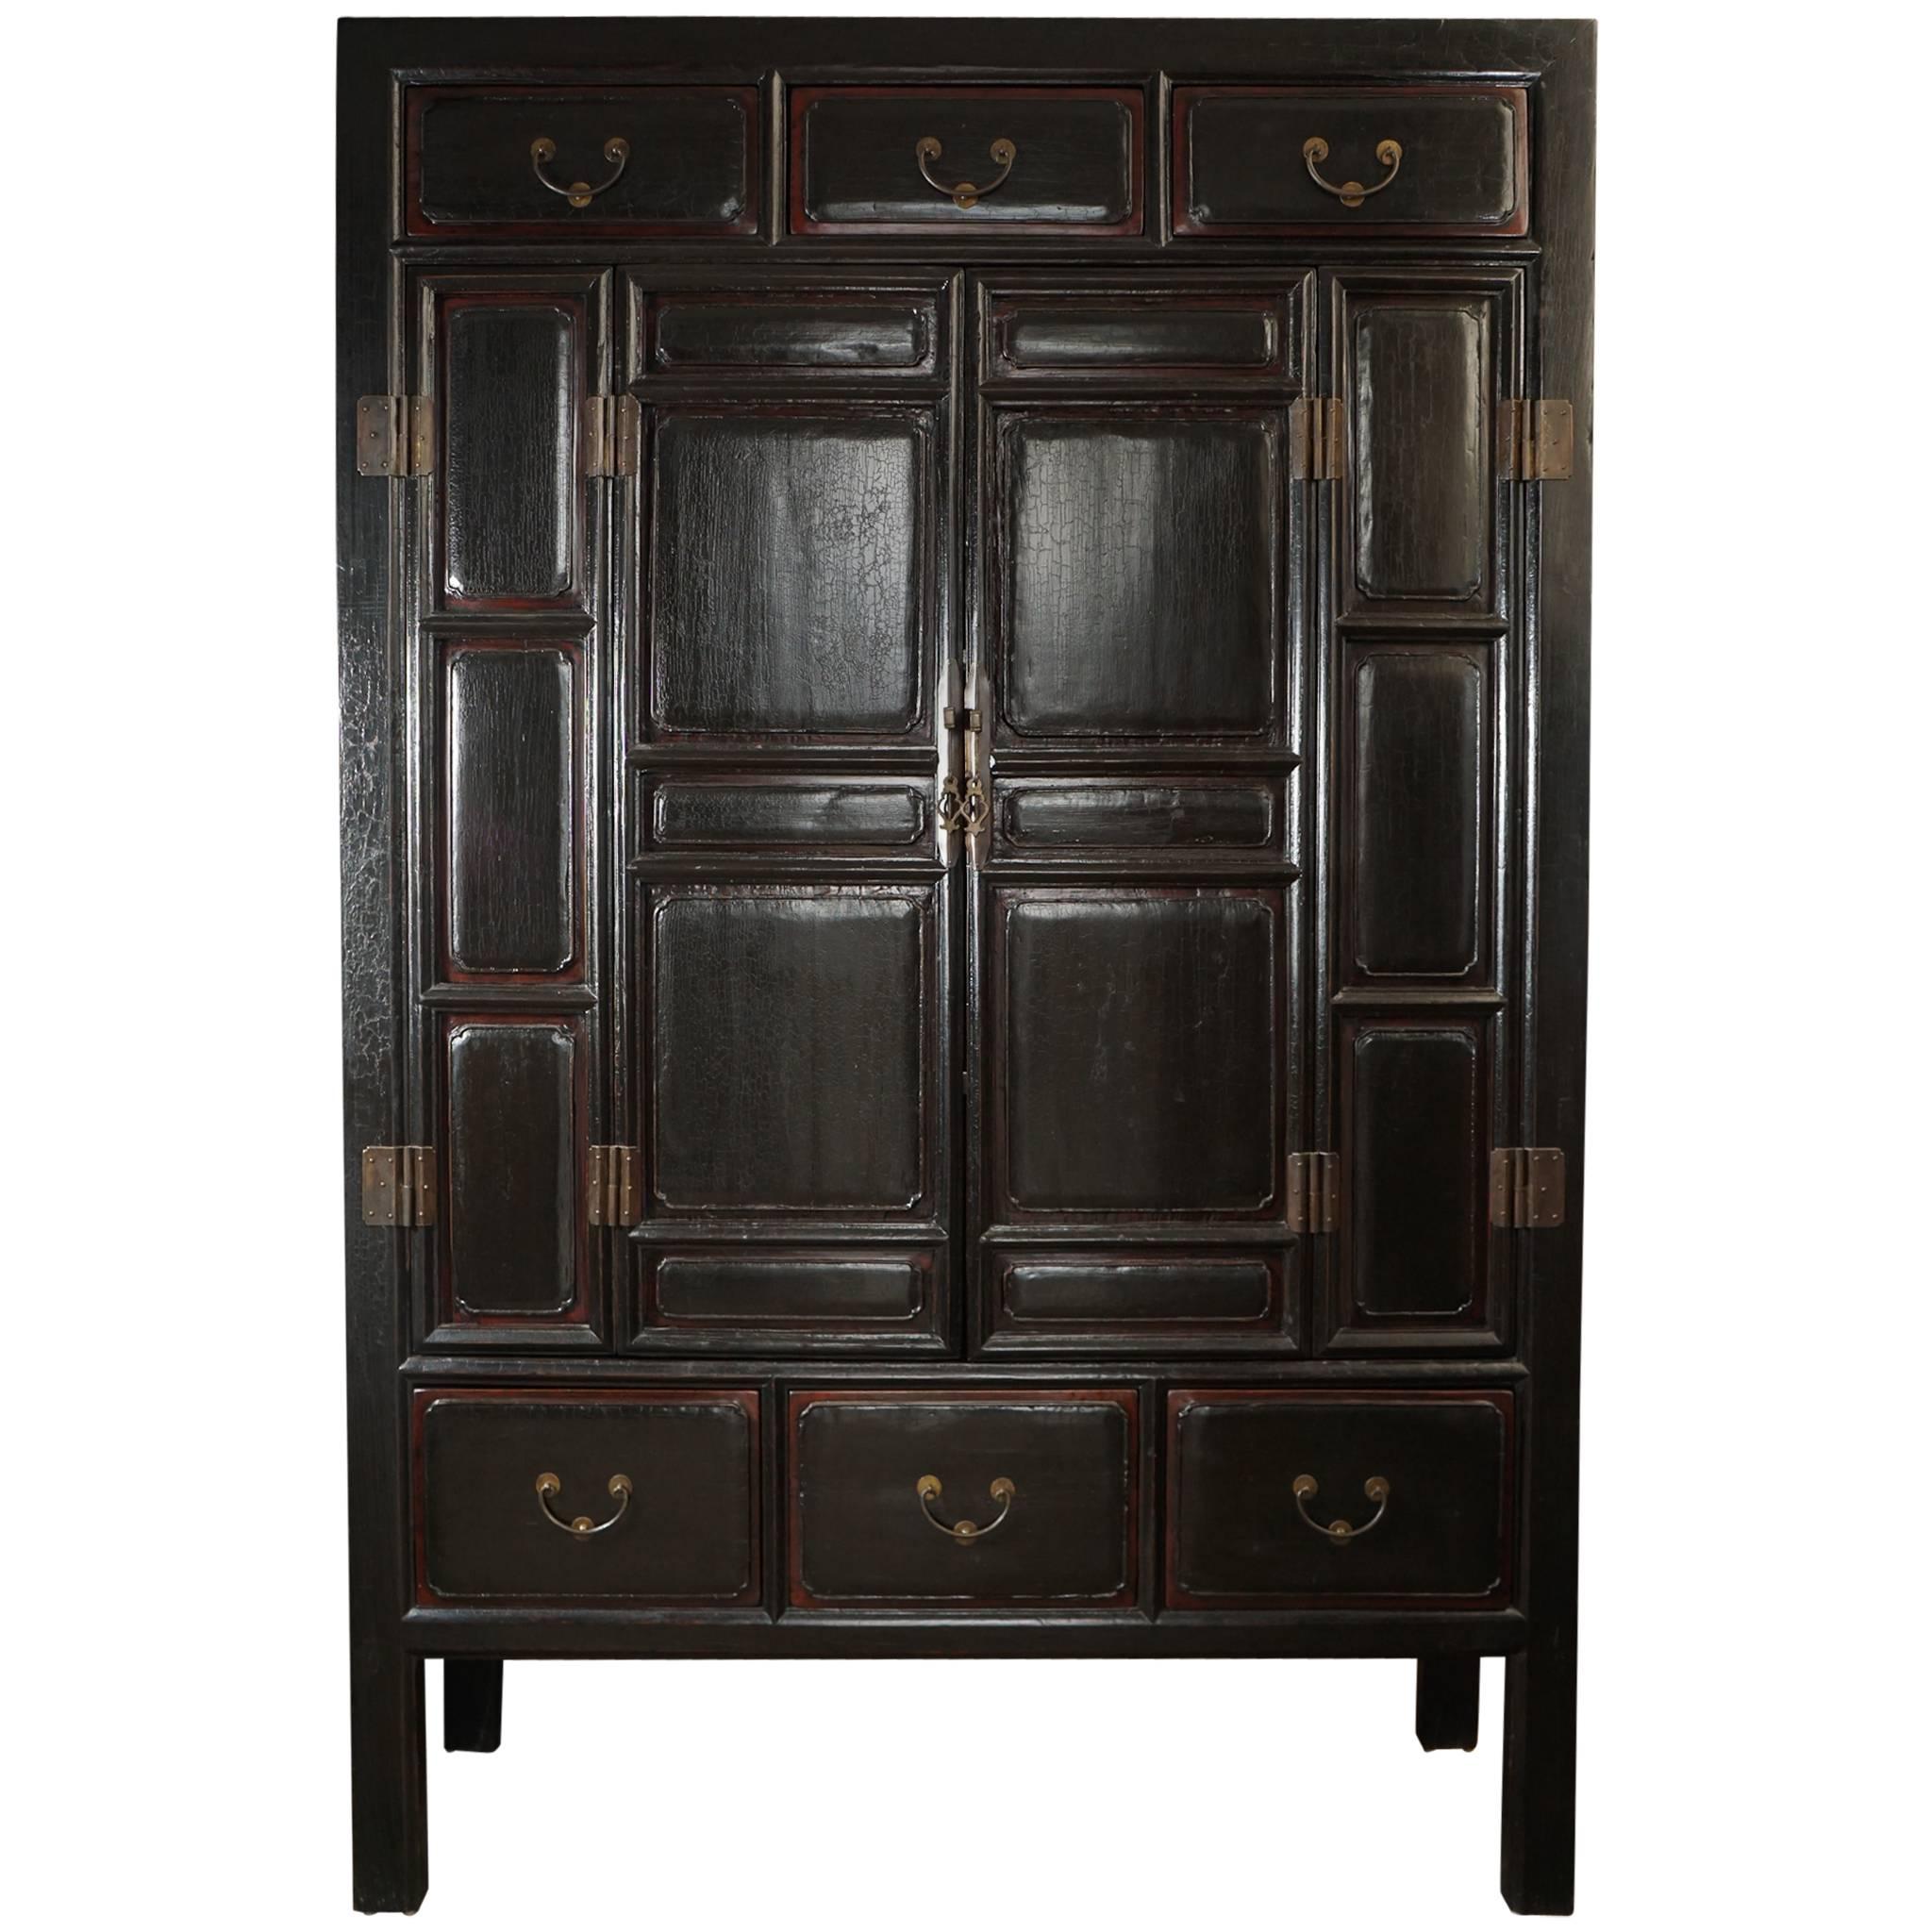 Large Late 19th Century Chinese Black Lacquer Two-Door Cabinet with Drawers